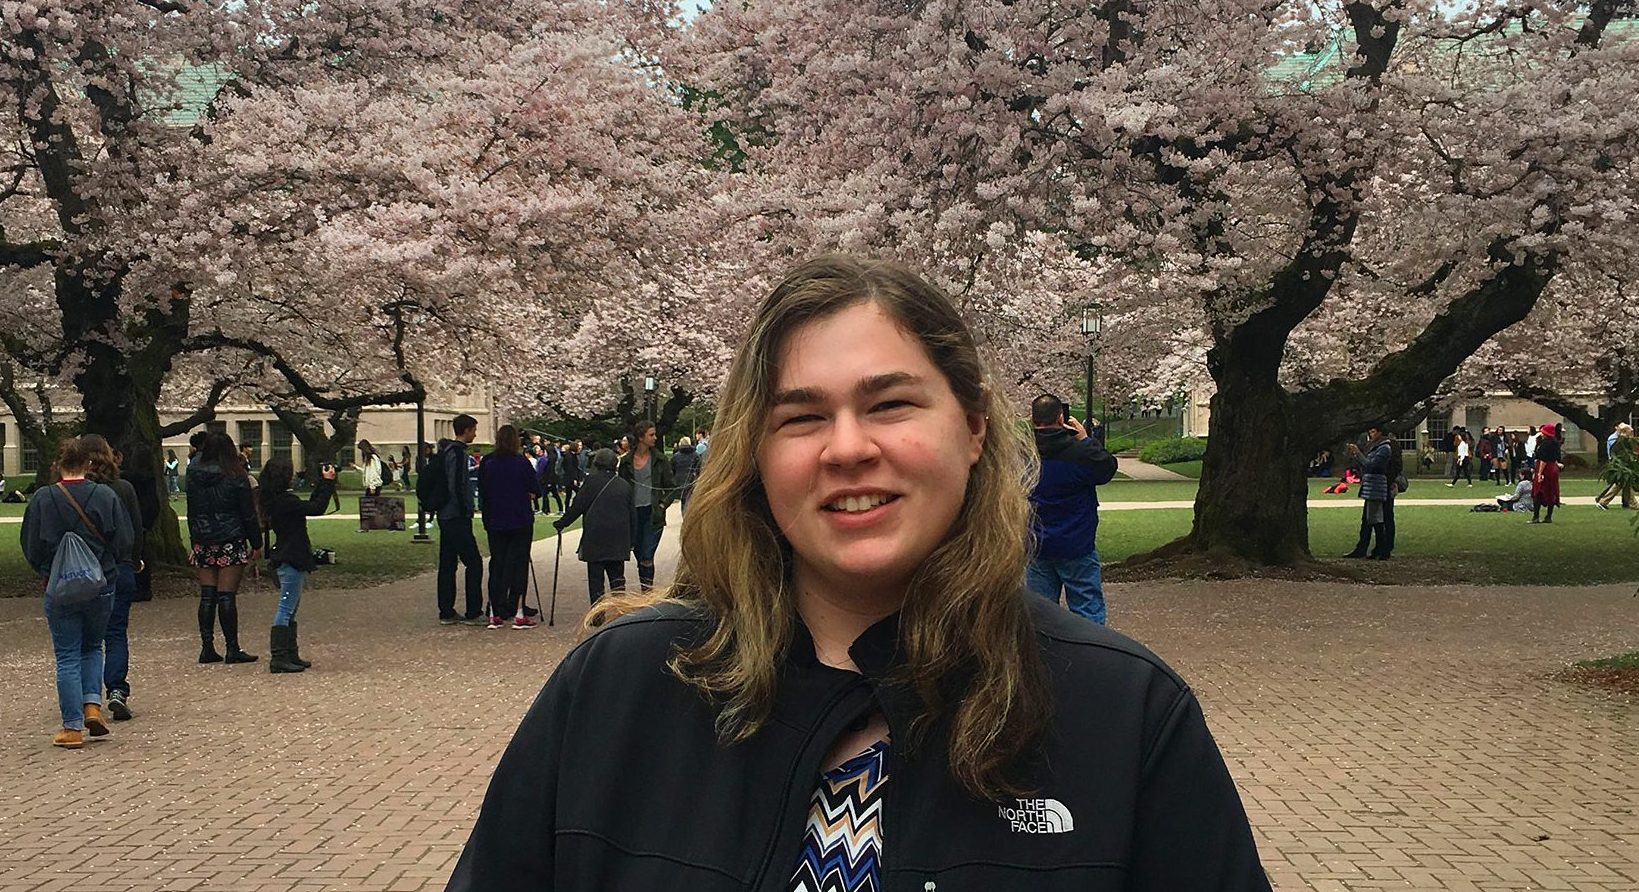 Portrait of Jacqueline Goodrich smiling, in a dark coat and blouse, the UW quad and cherry blossoms in the background